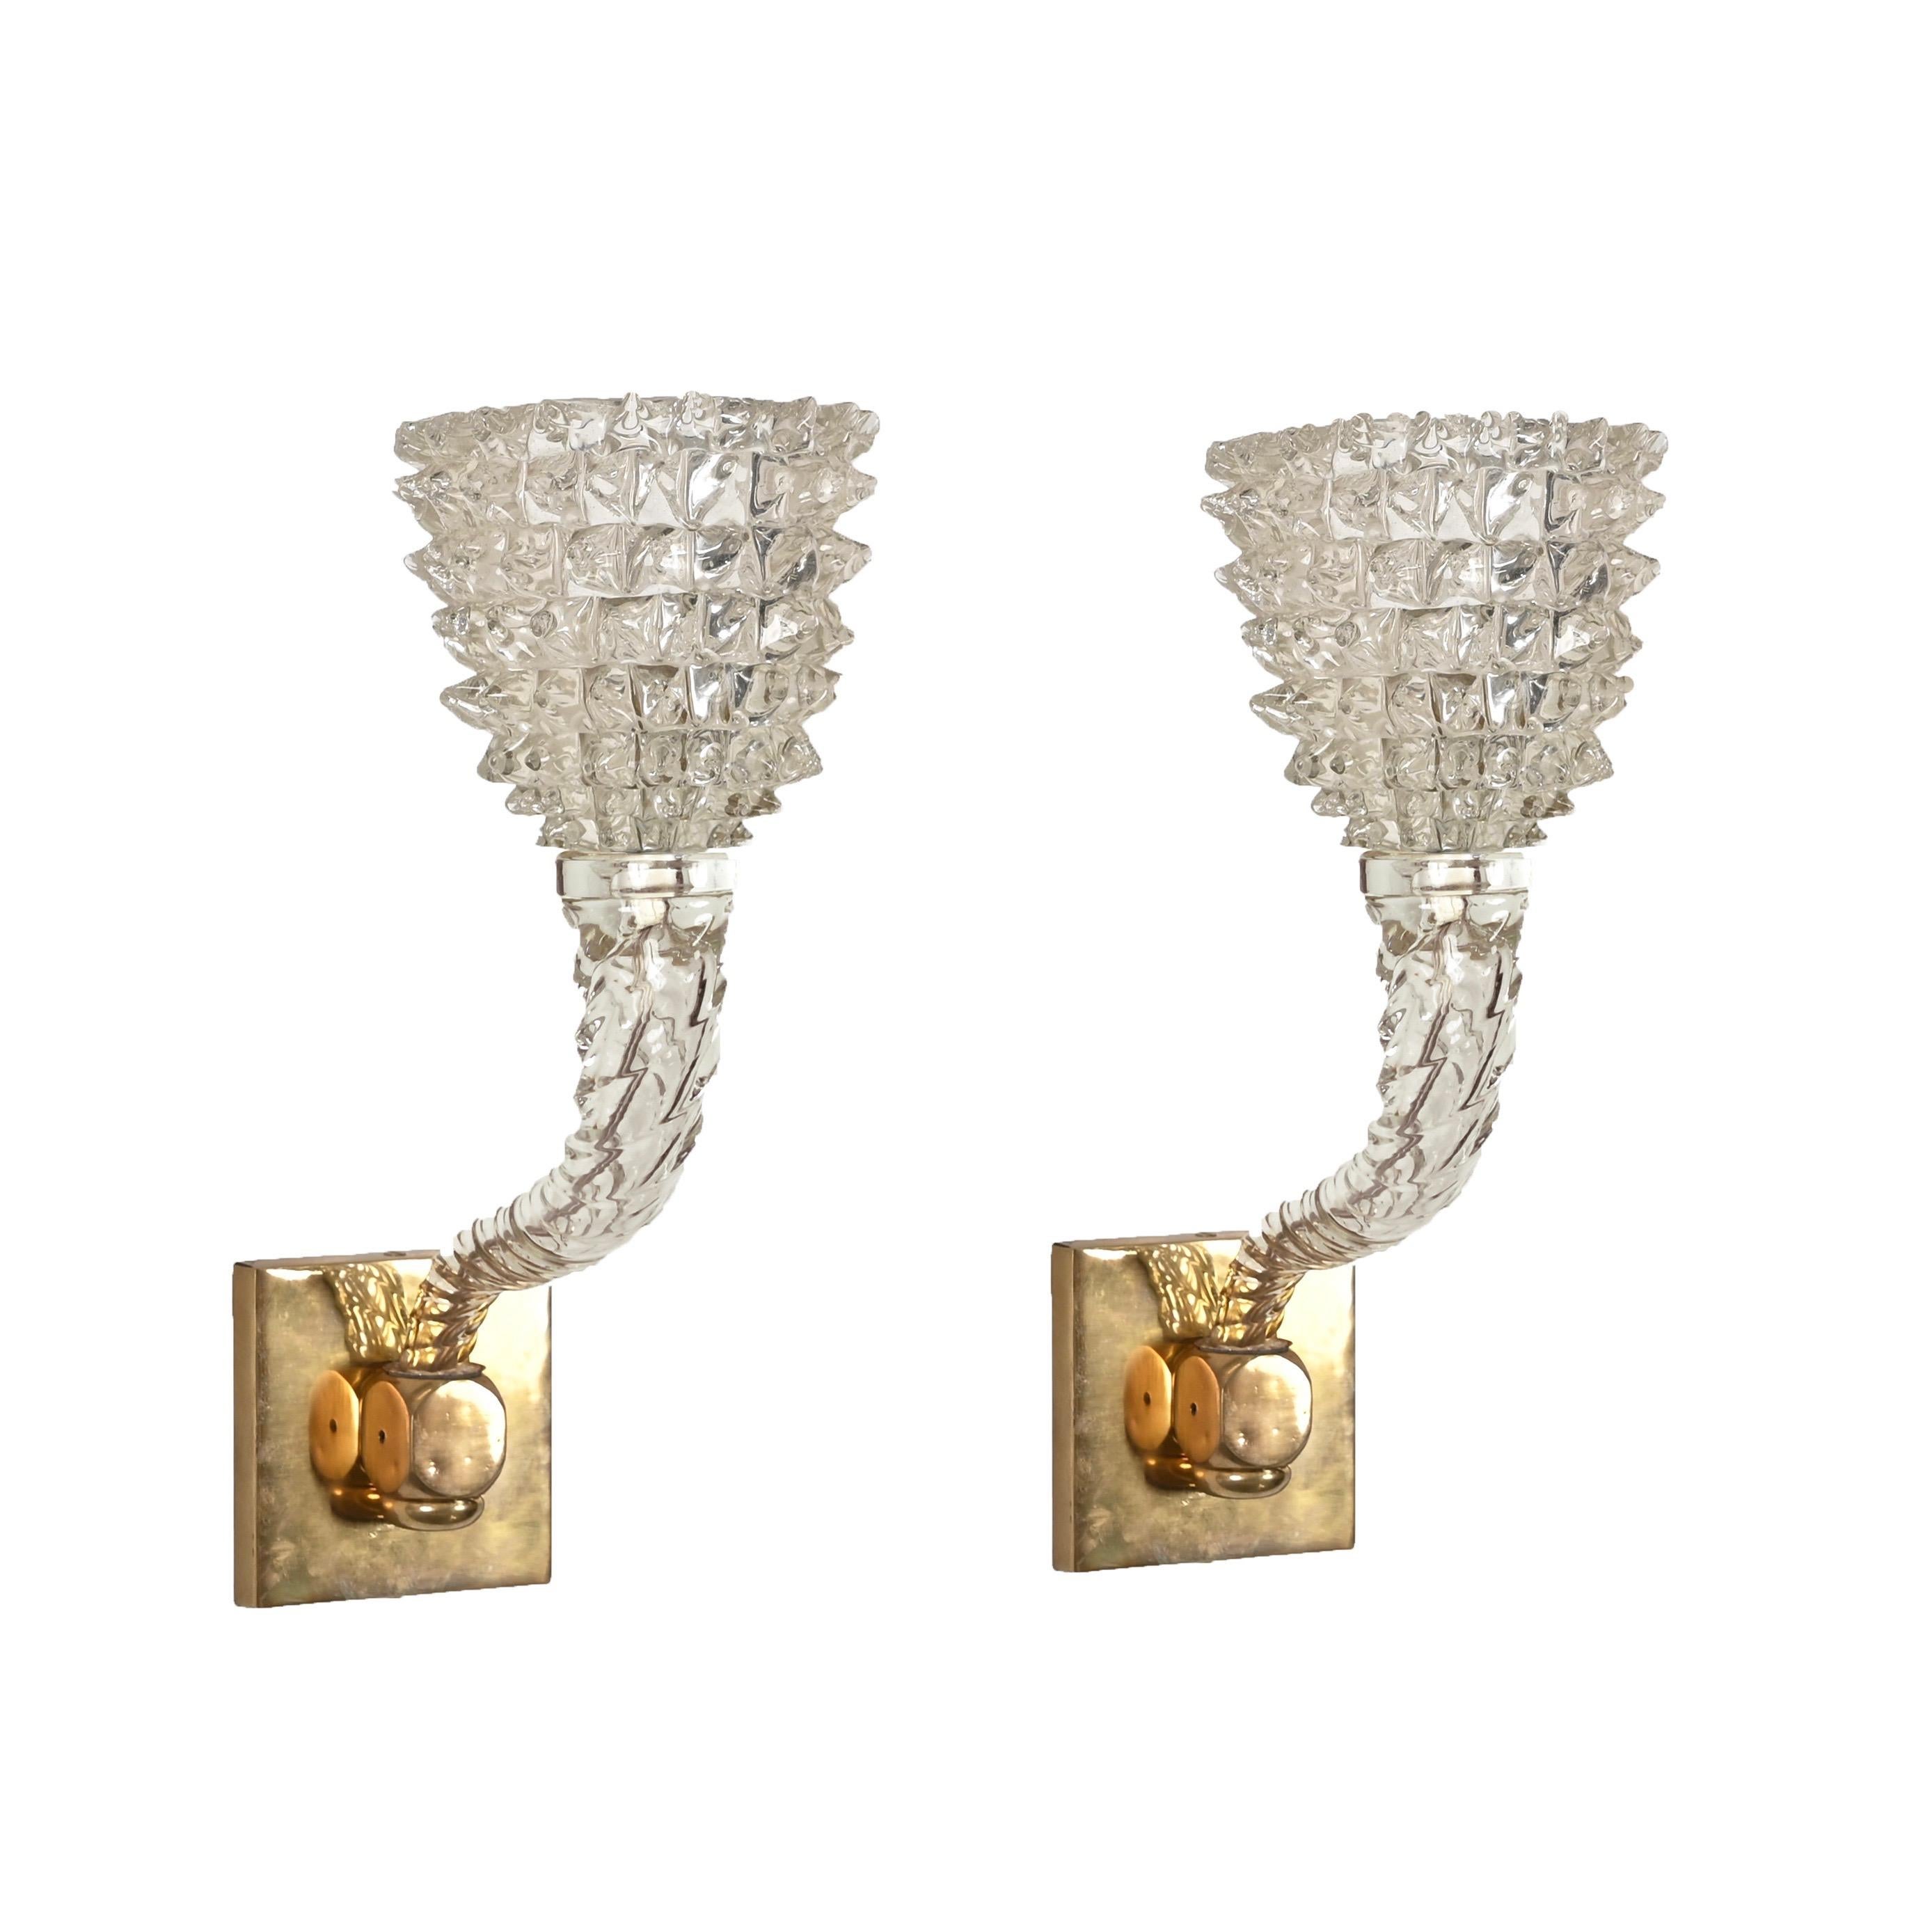 Pair of Barovier Murano Rostrato Twisted Glass and Brass Sconces, Italy 1950s For Sale 1